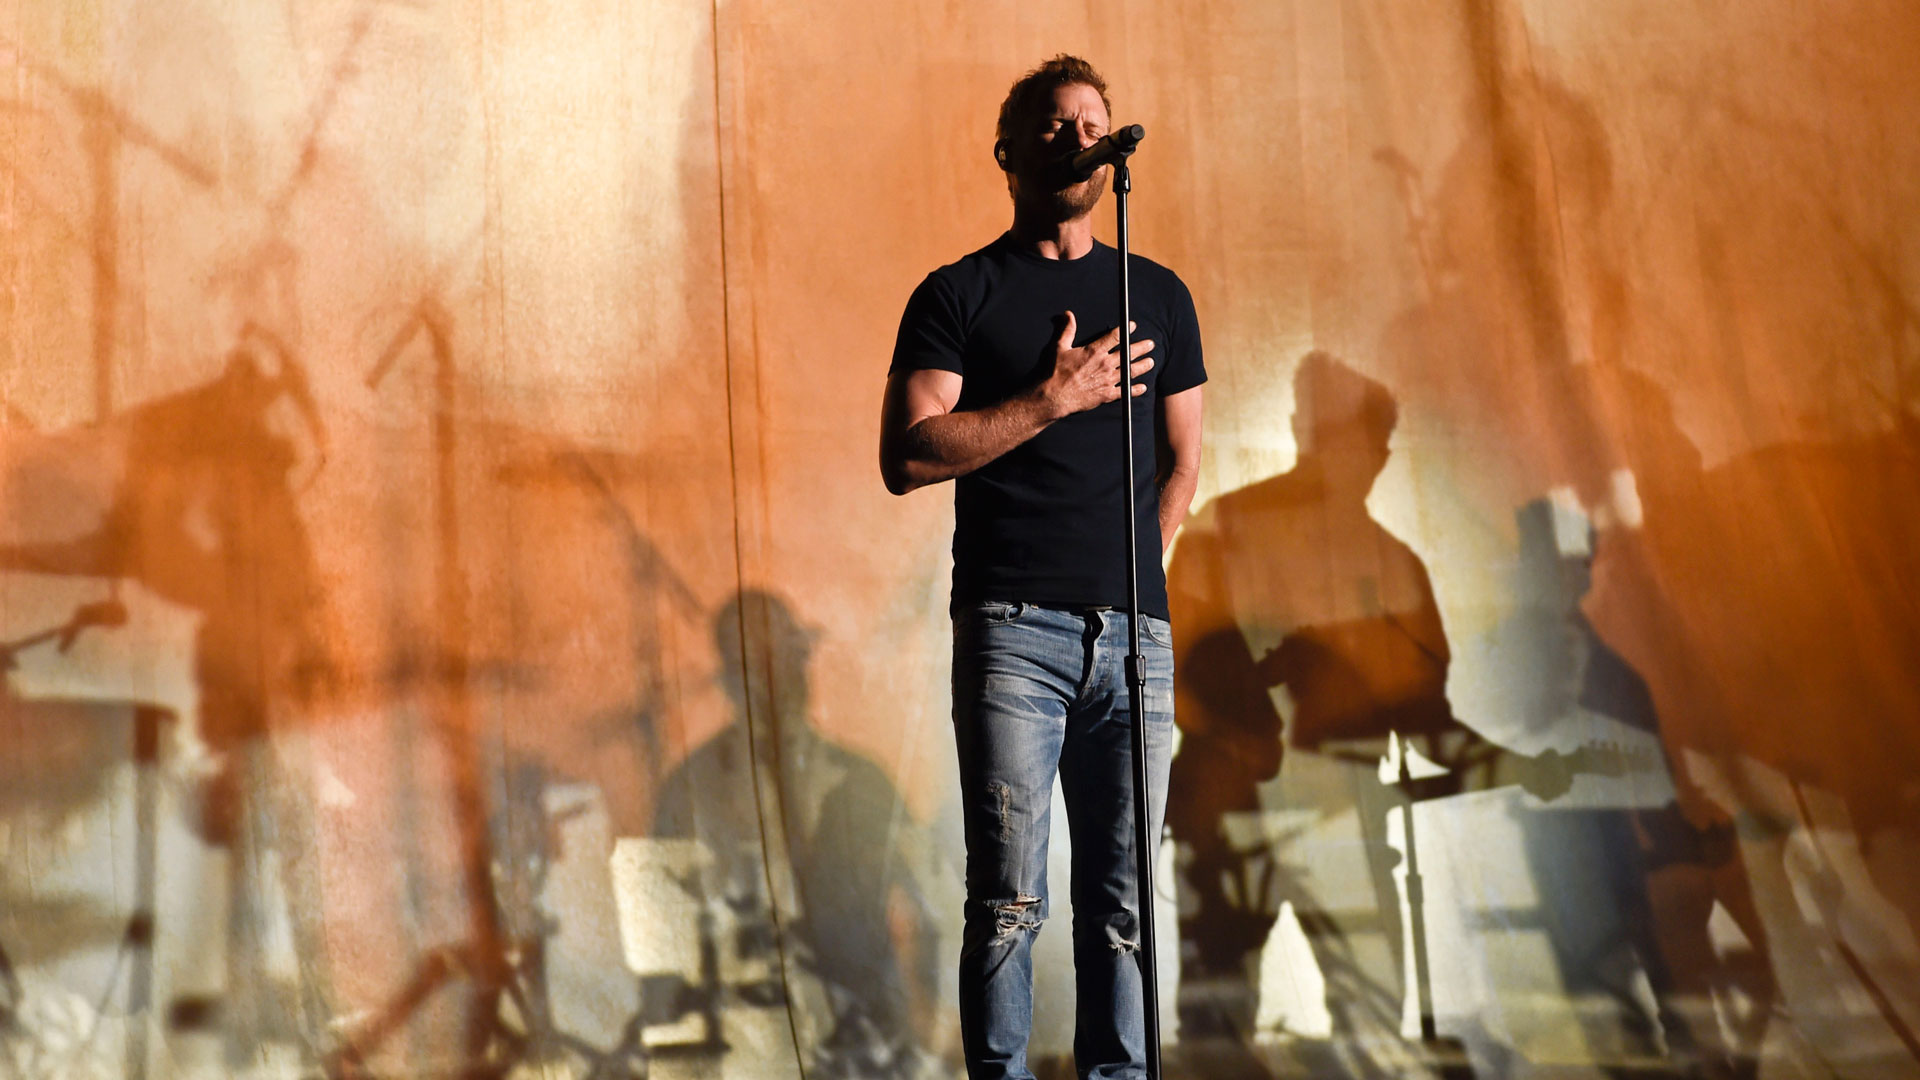 Dierks Bentley puts his hand on his chest during rehearsals for 